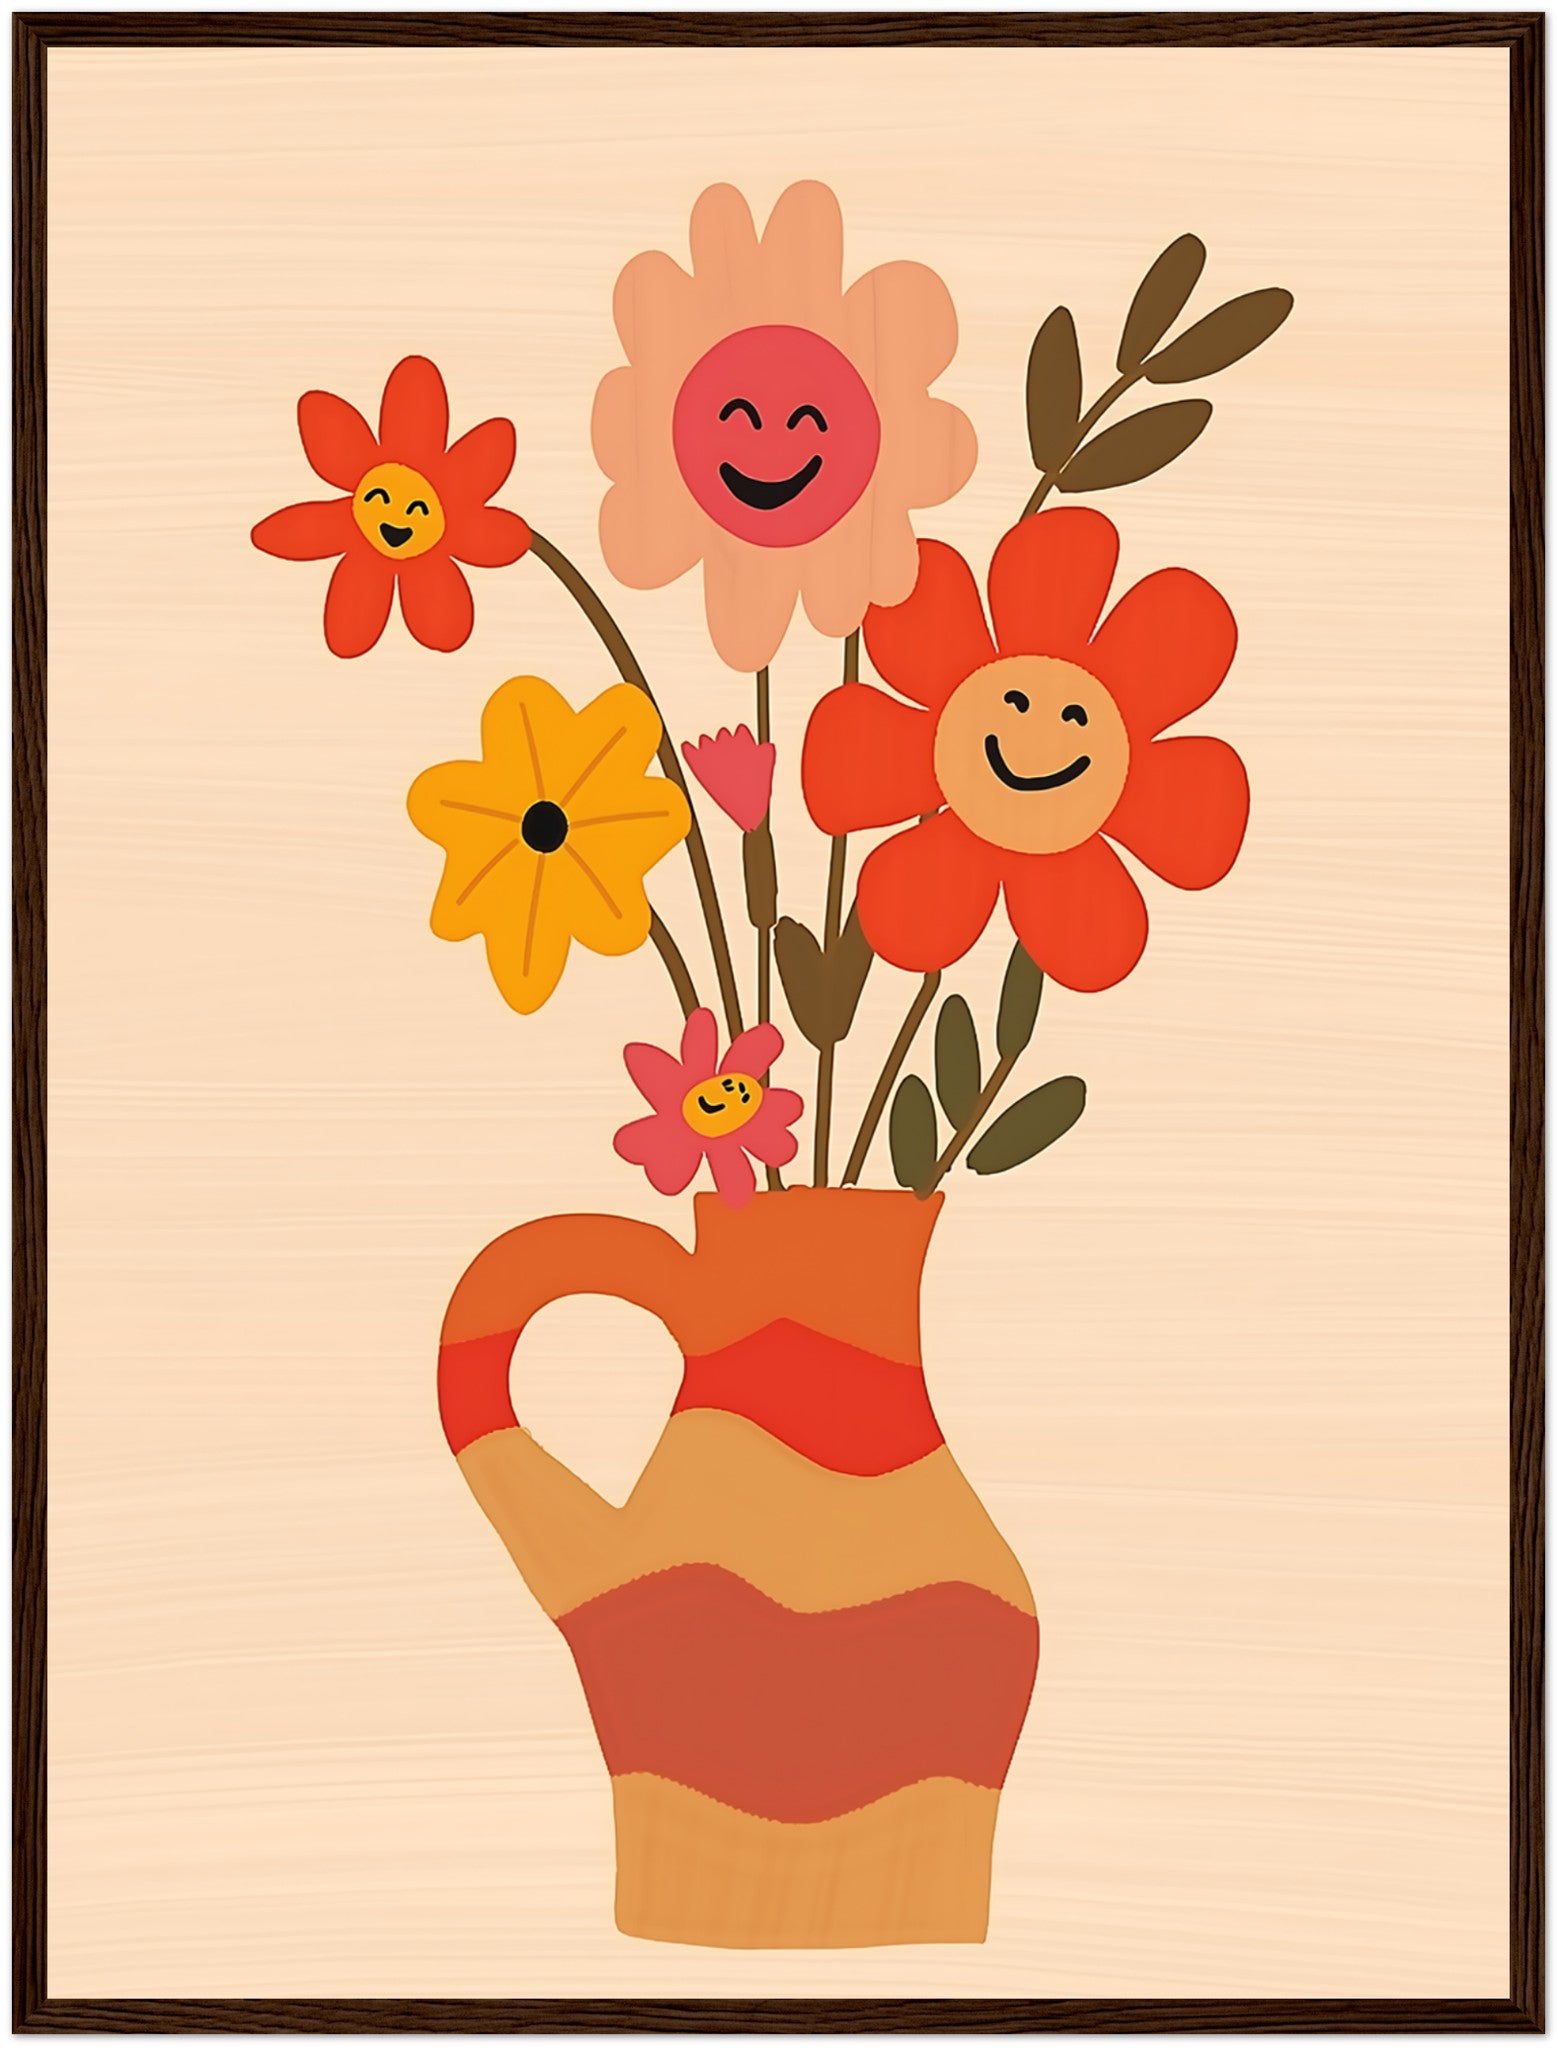 A framed illustration of a vase with smiling cartoon flowers.